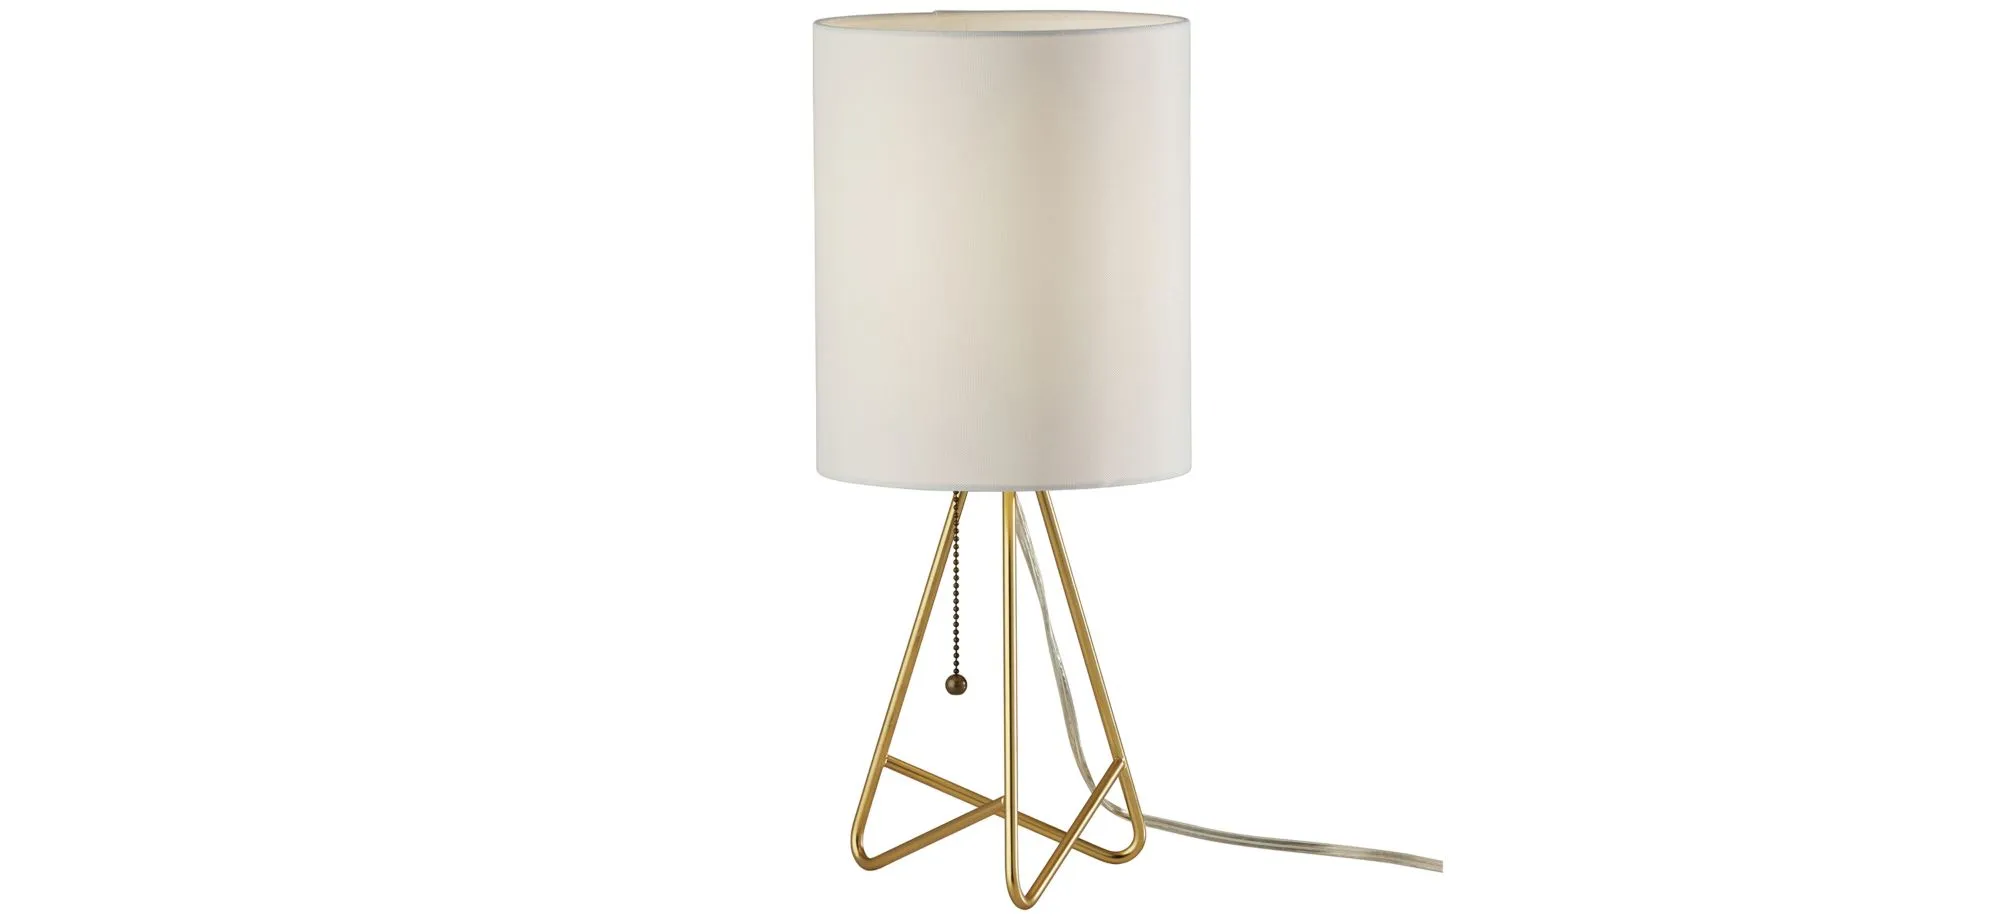 Nell Table Lamp in Antique Brass by Adesso Inc